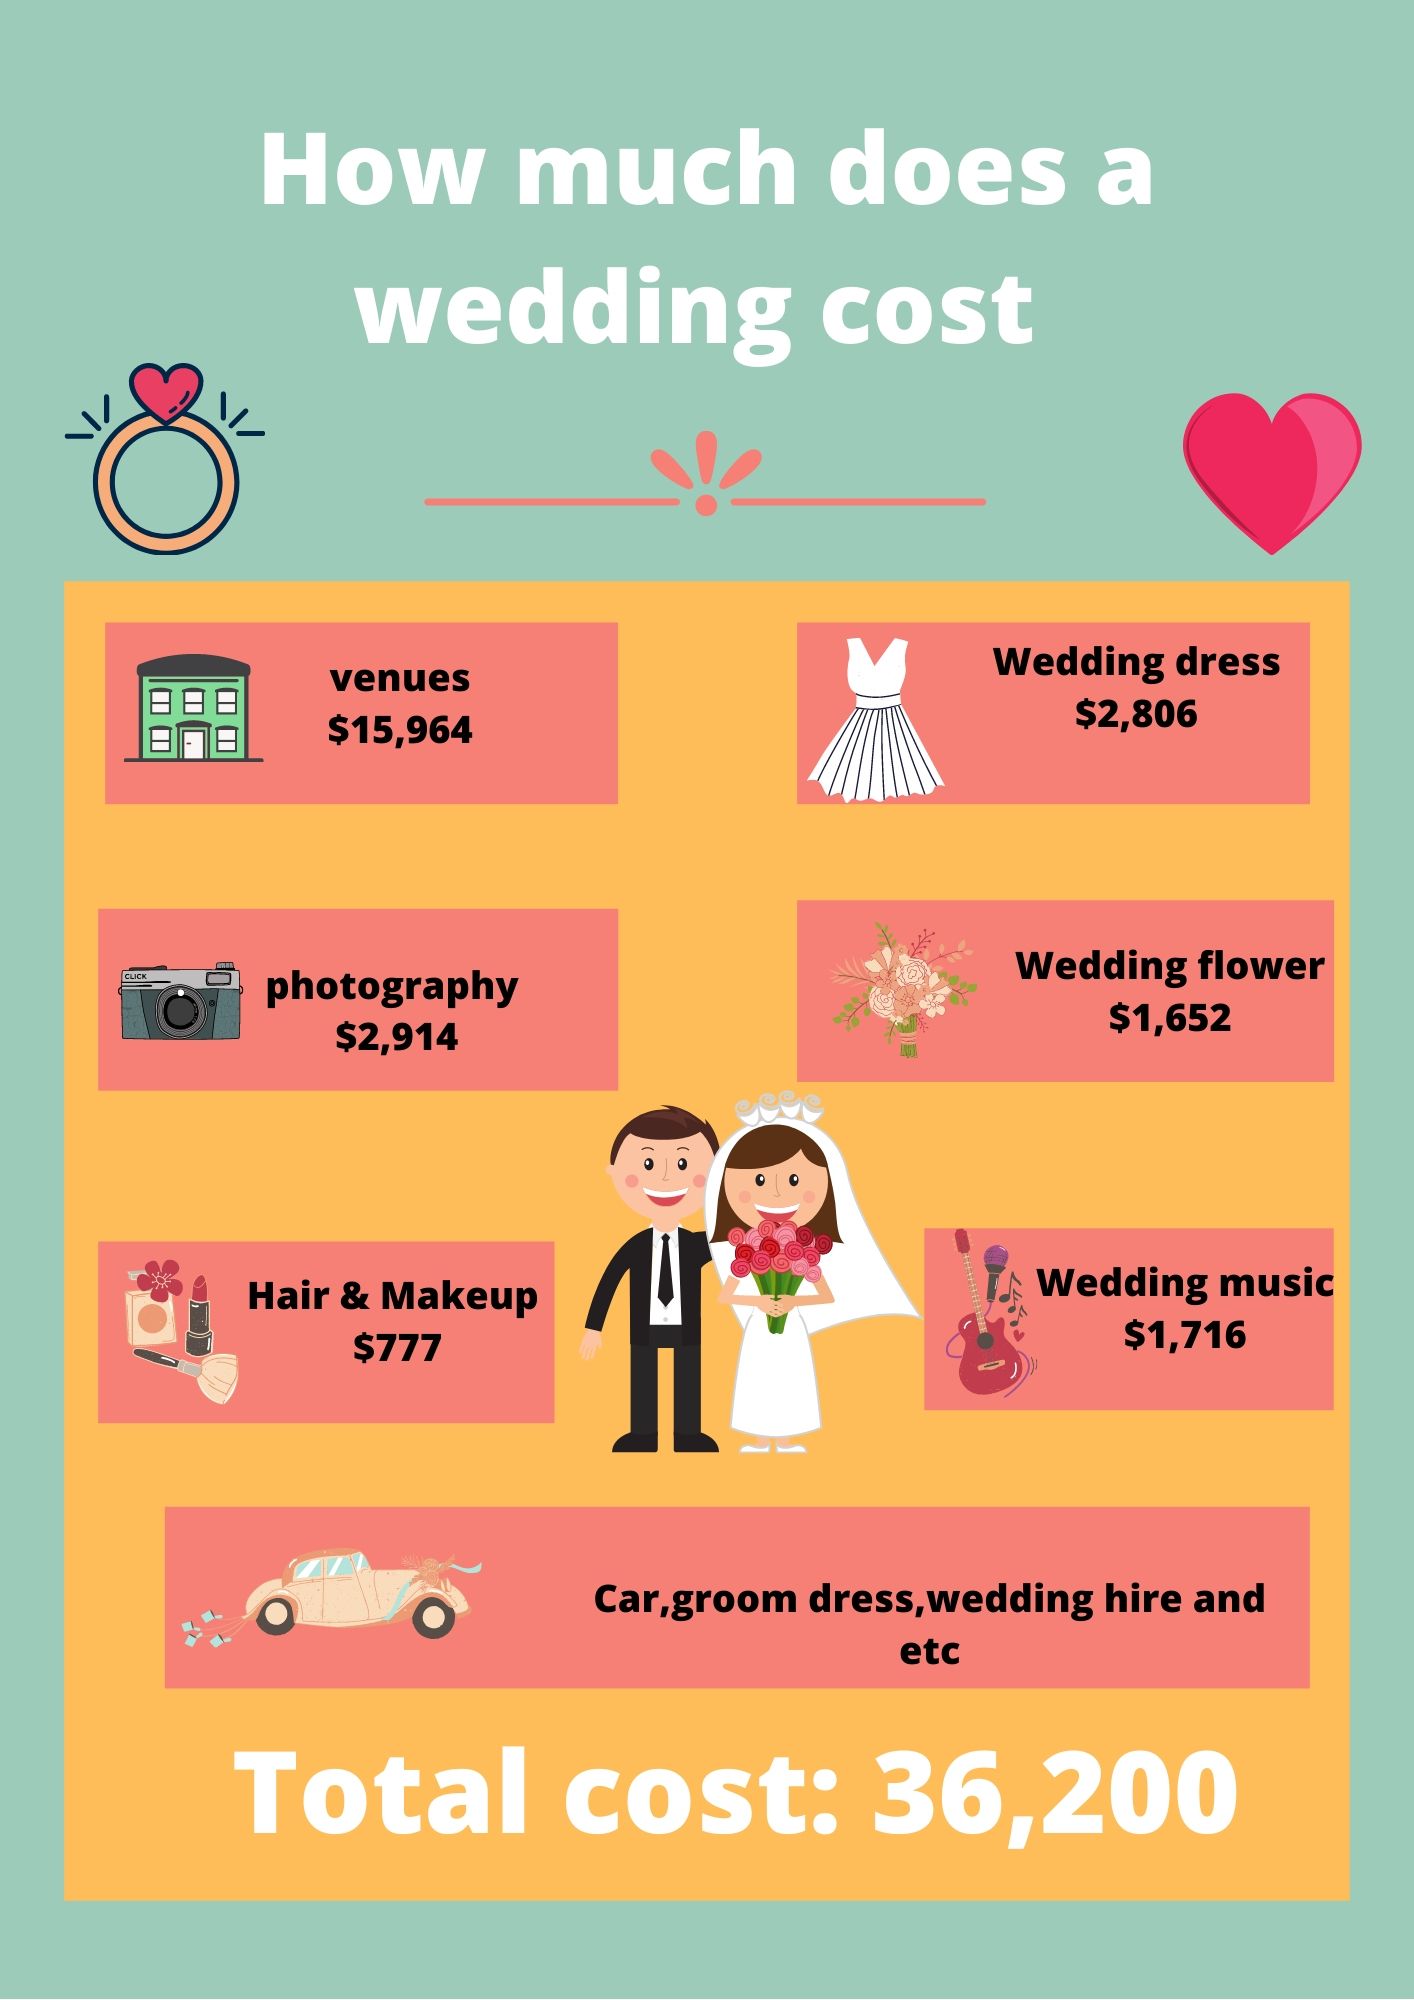 How much does a wedding cost in germany?